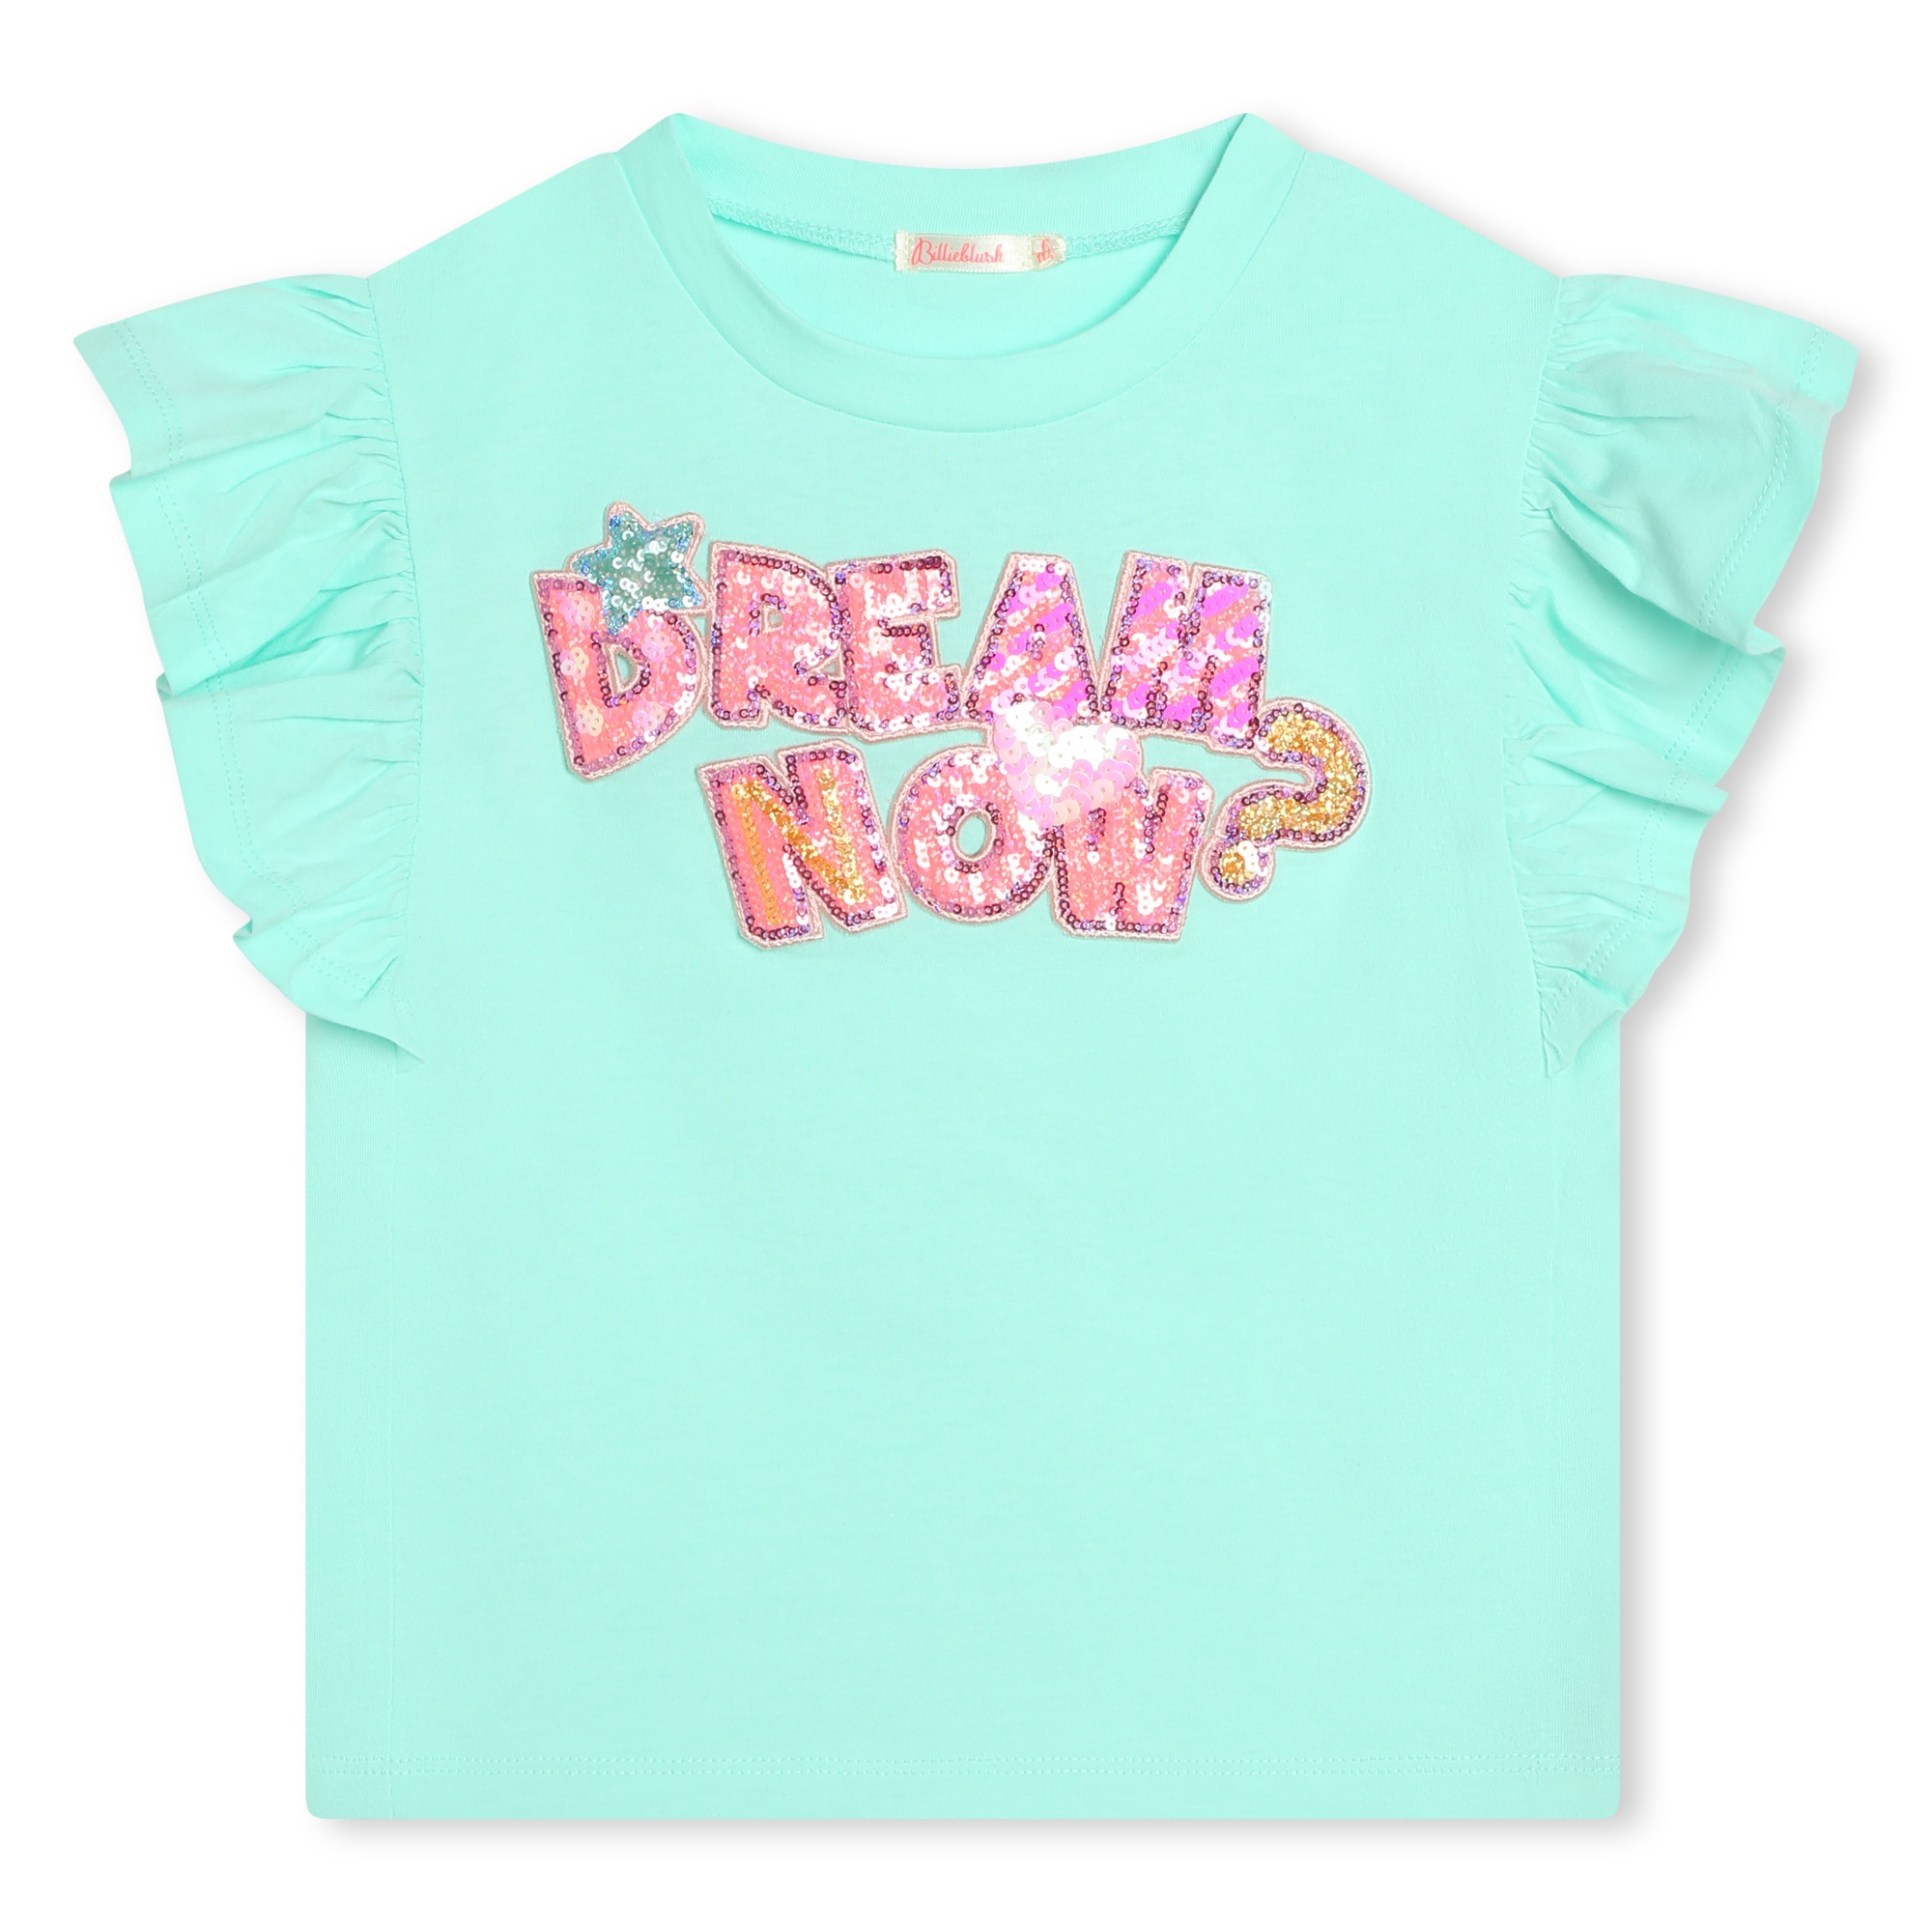 Girls' T-shirt with frills